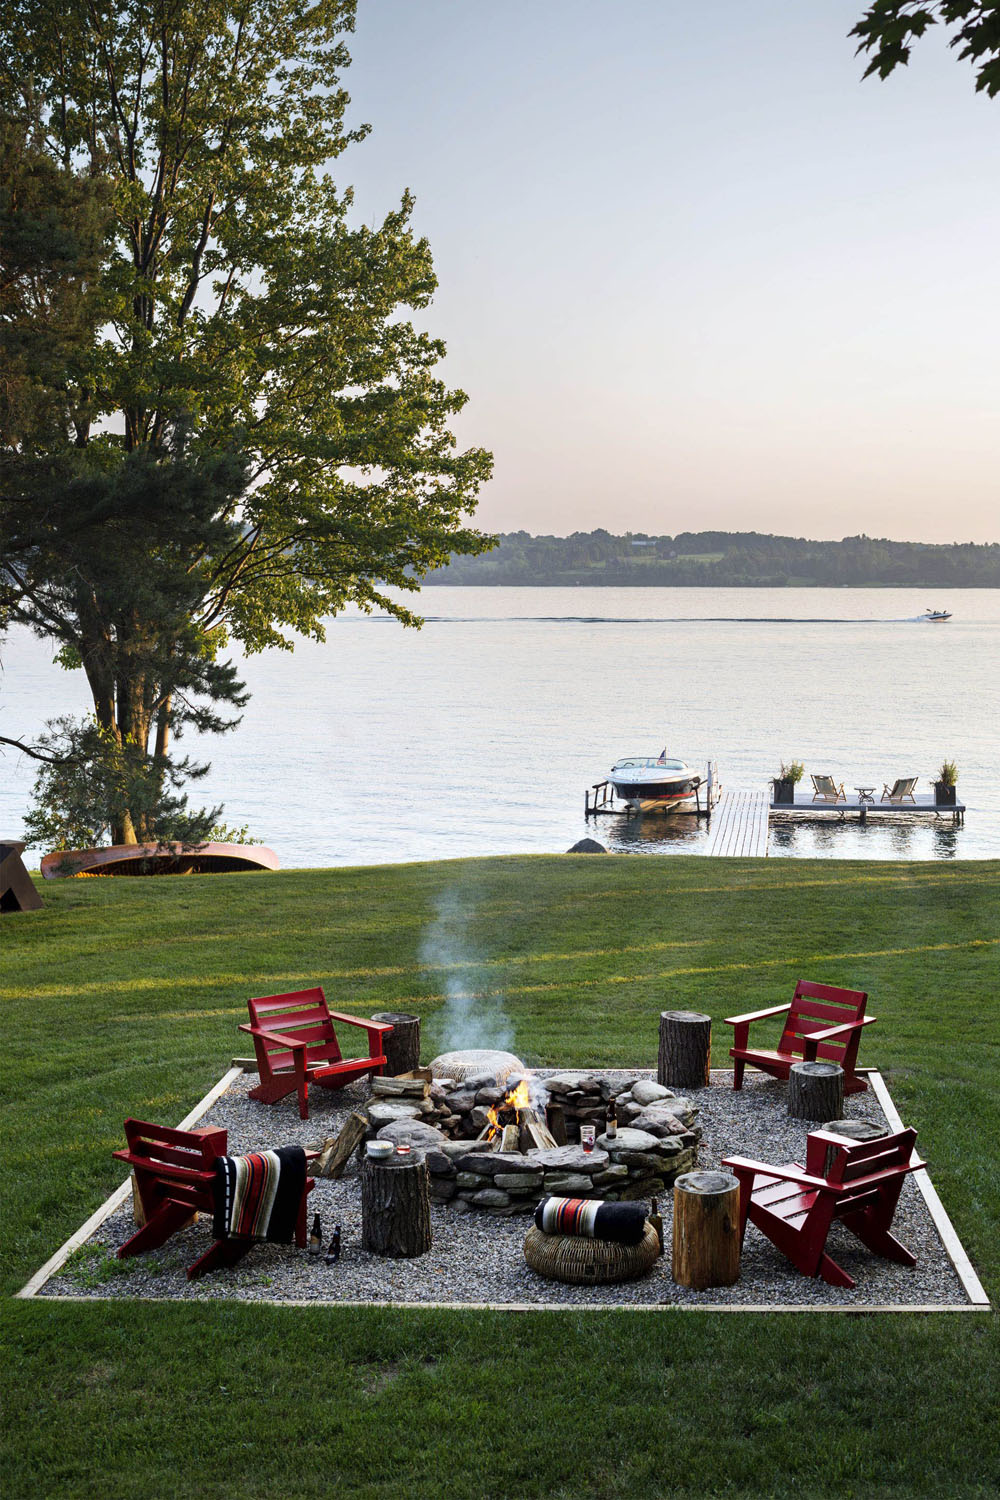 Outdoor Fire Pit by the Lake